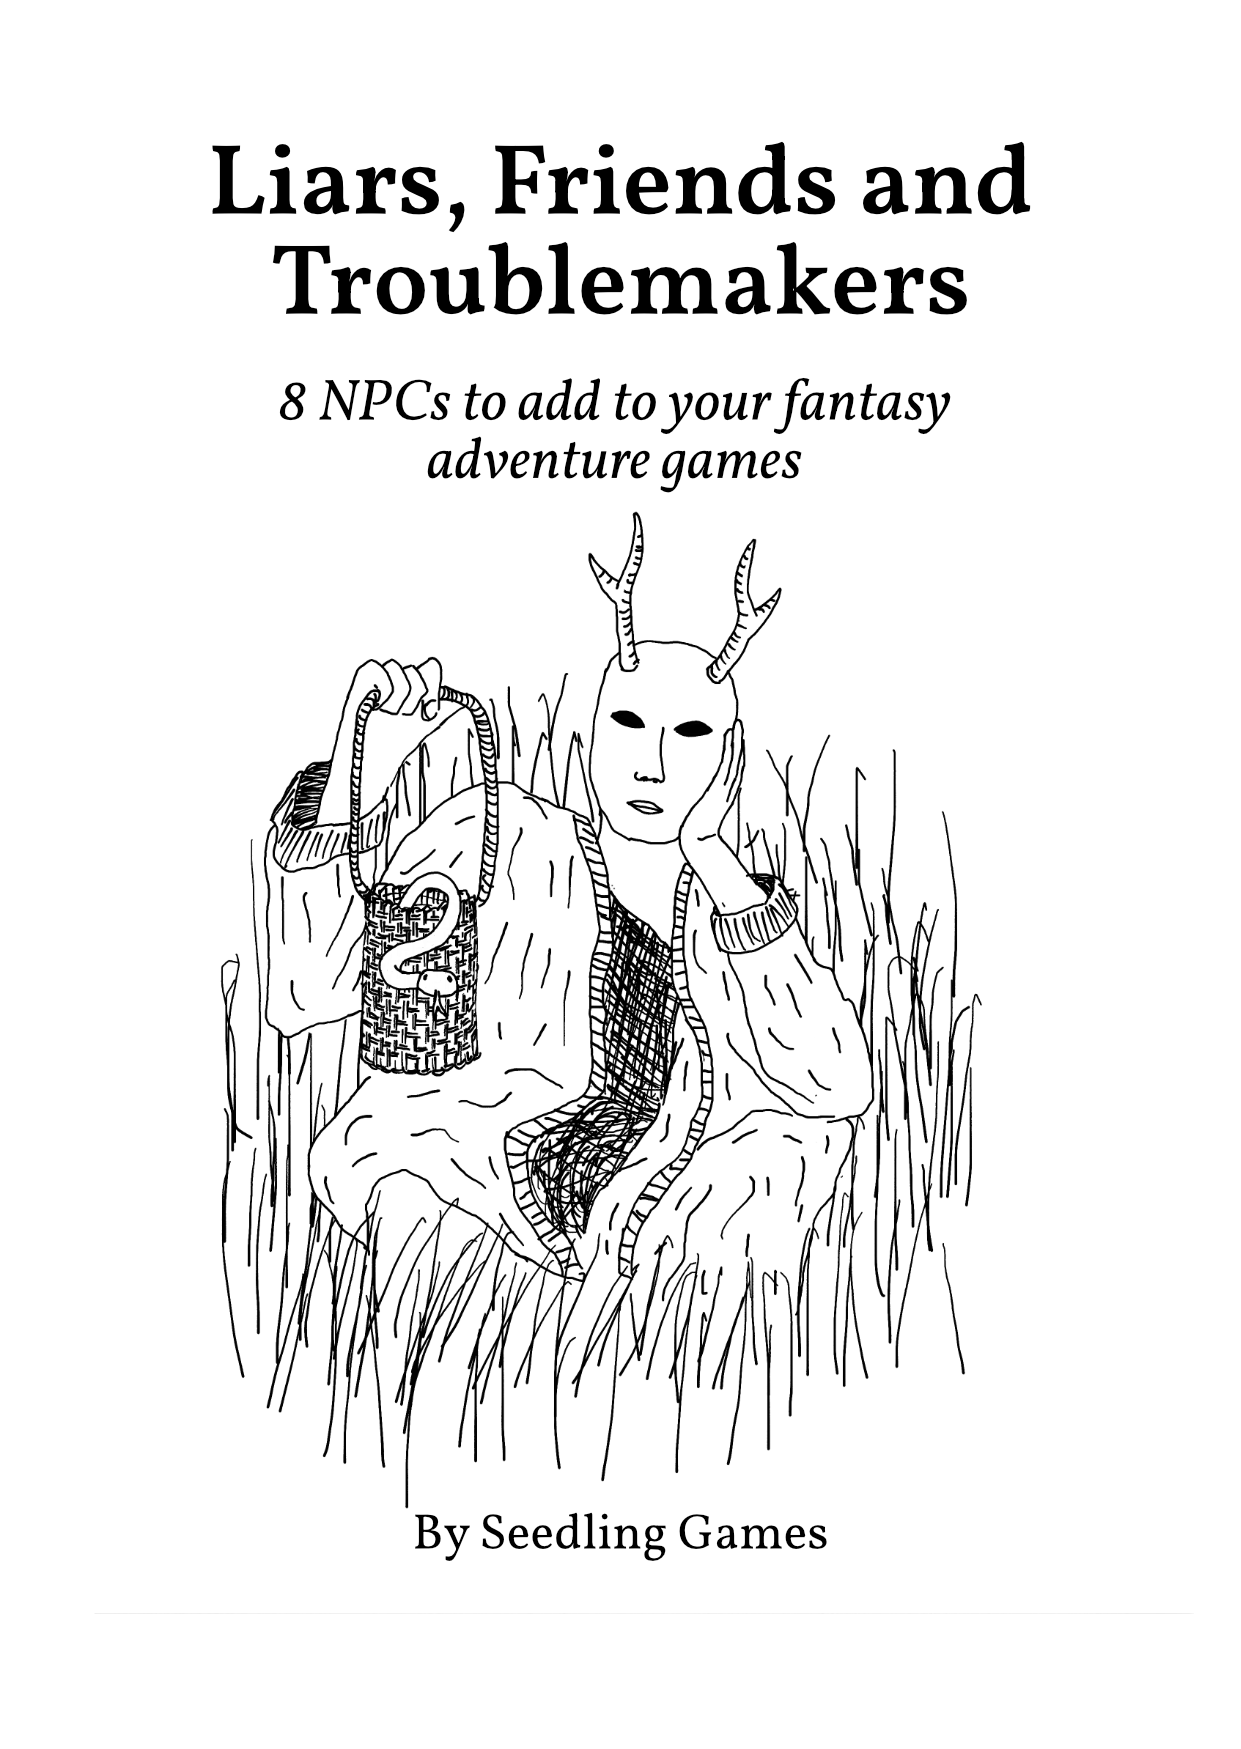 Cover of the supplement 'Liars, friends and troublemakers'